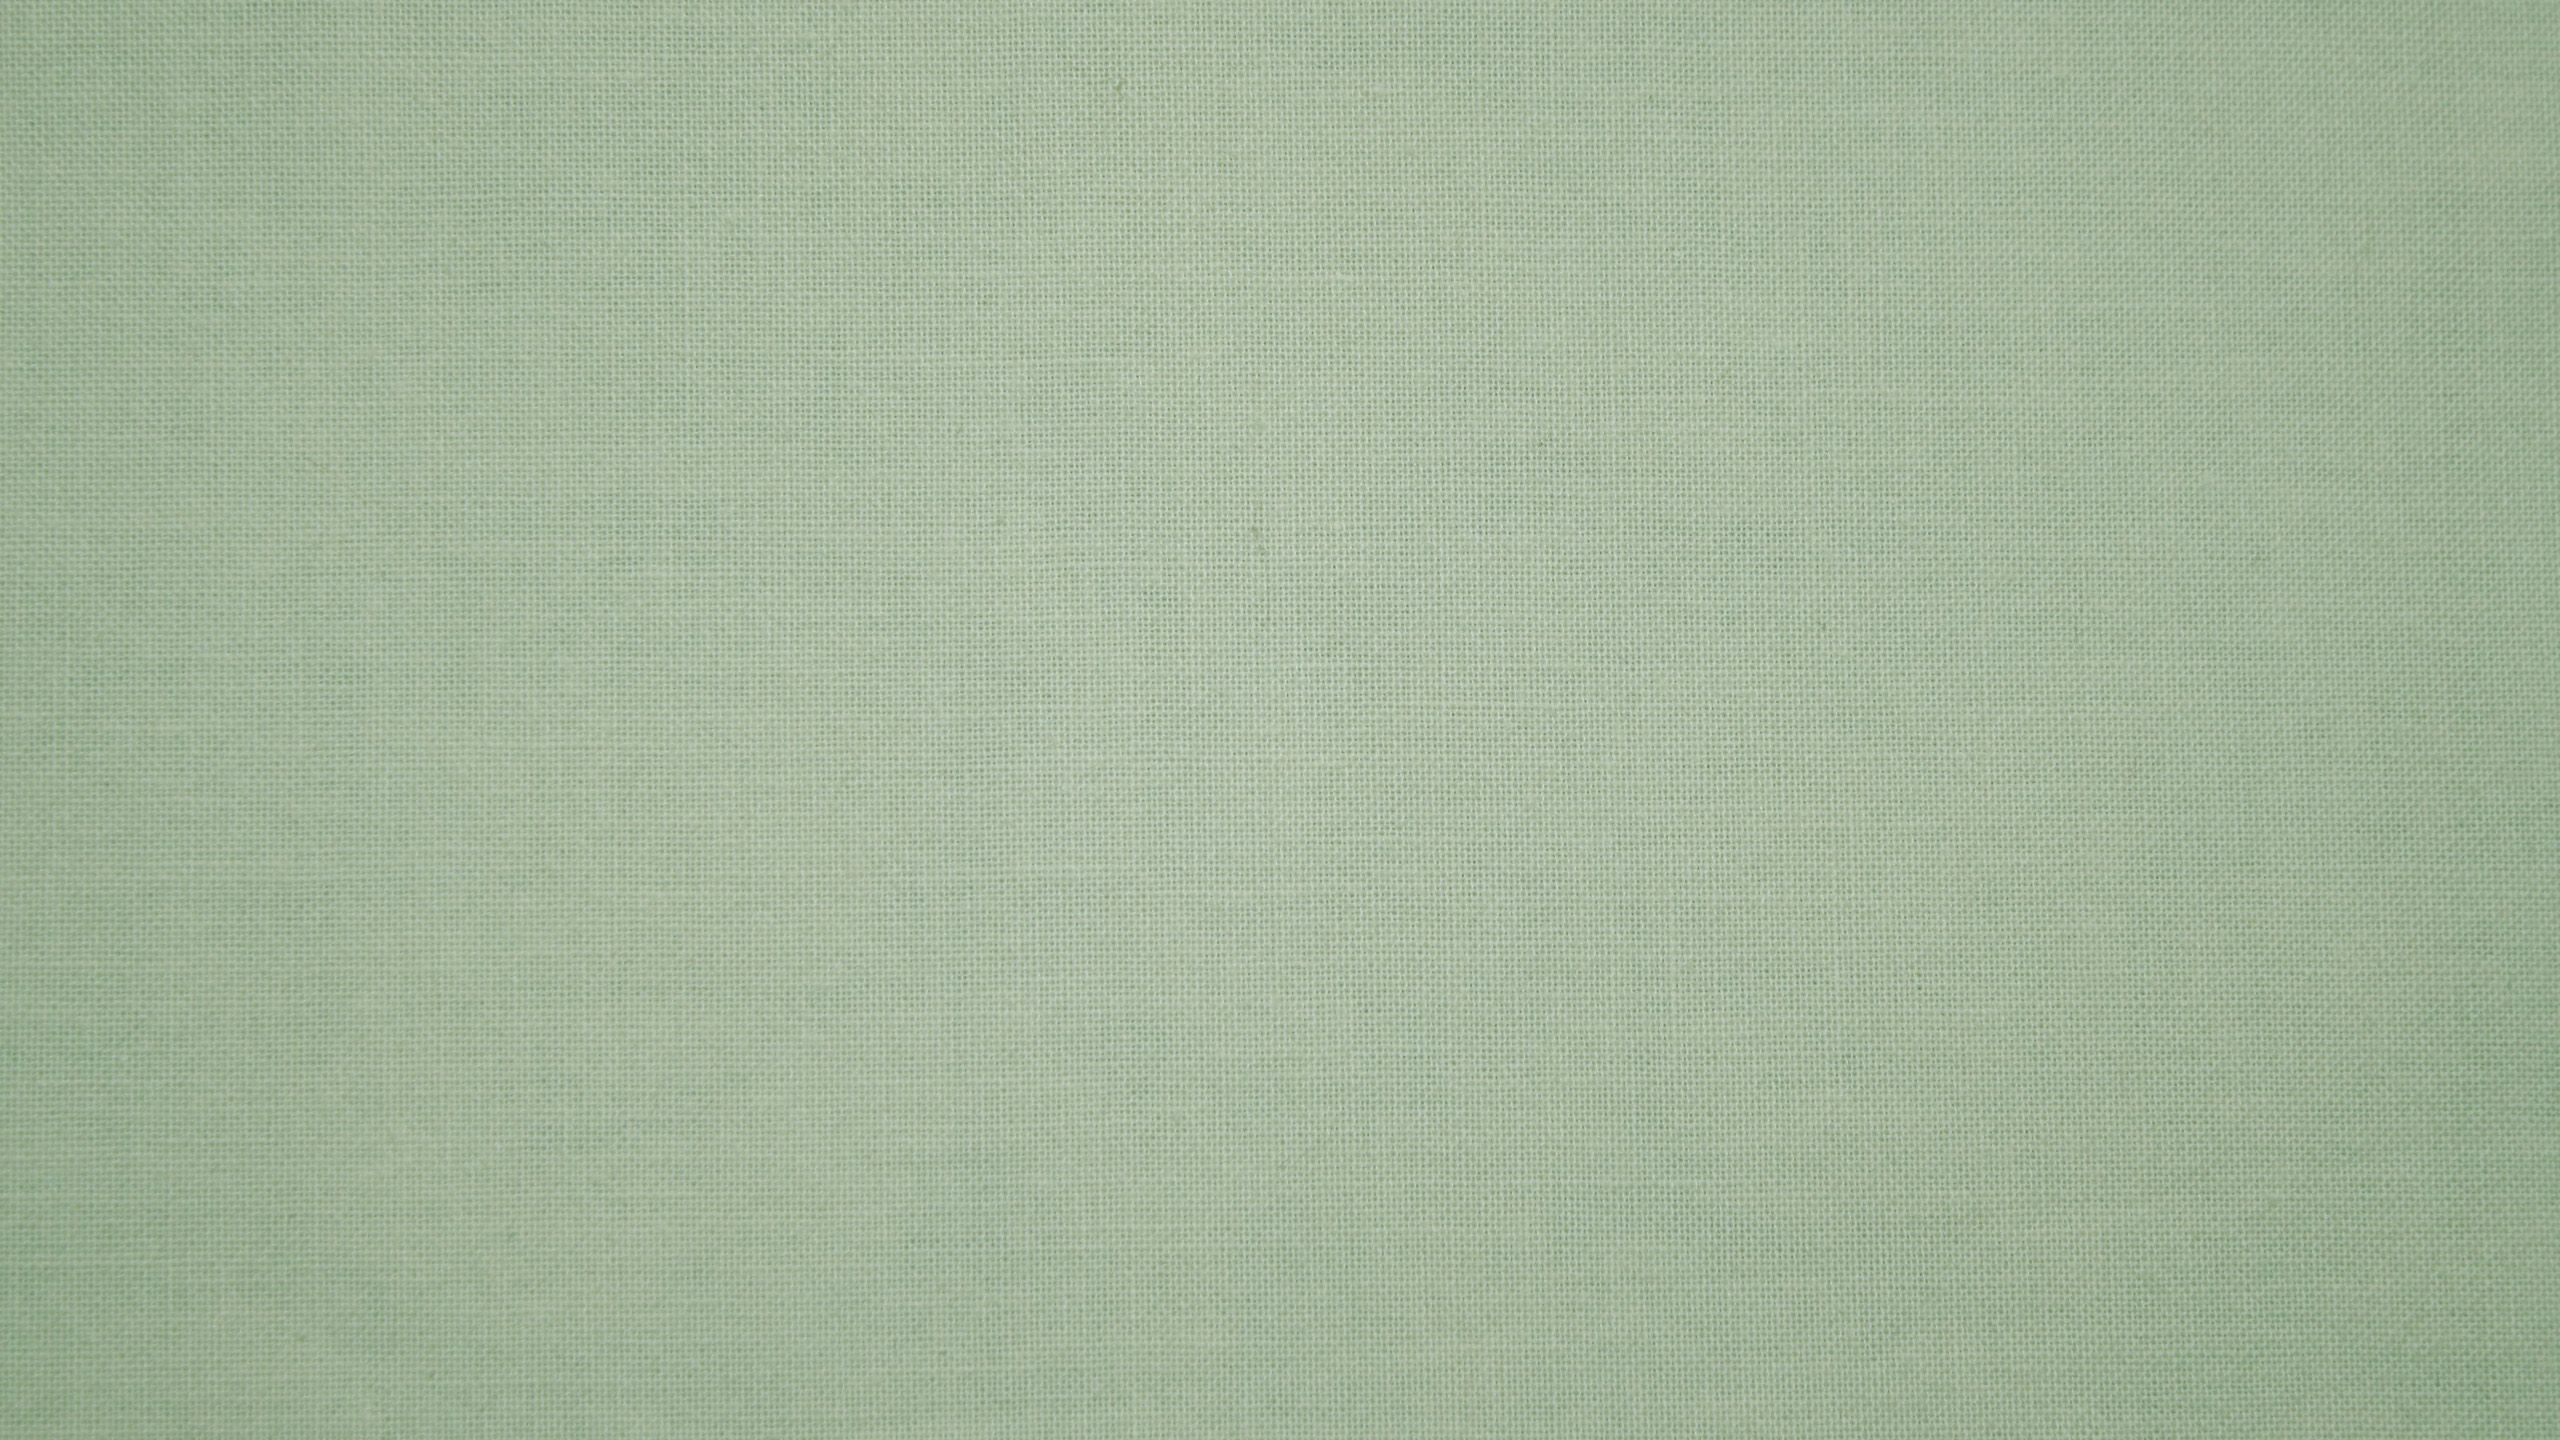 A close up of a green fabric - Sage green